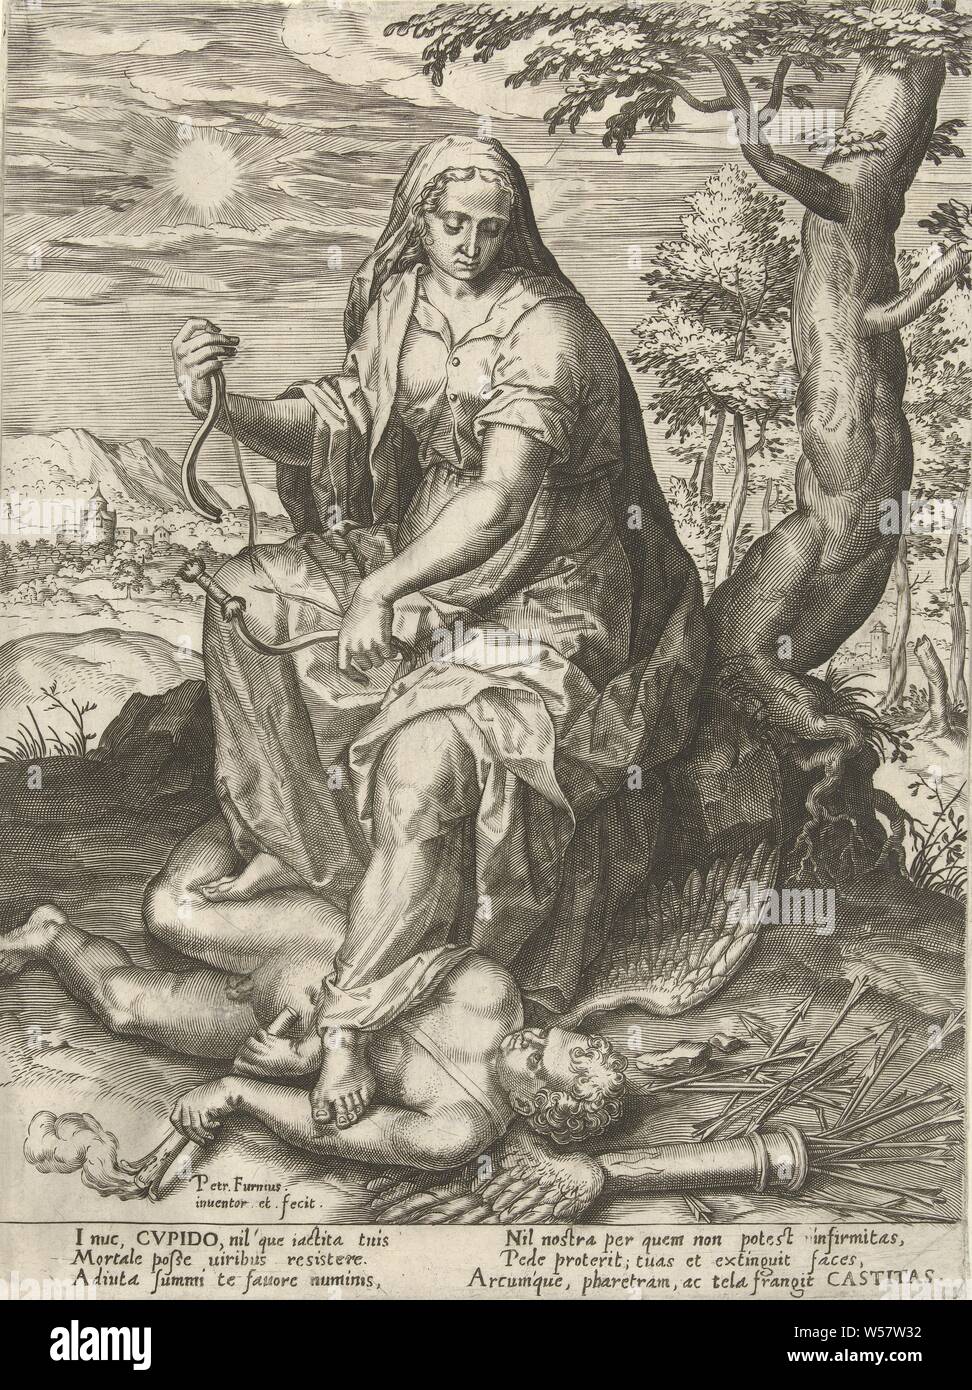 Chastity overcomes Love Seven virtues and seven vices (series title), The personification of Chastity (Castitas) sits under a tree and tramples Amor, the god of love. She breaks the bow of Amor in two. The print has a Latin caption and is part of a series about virtues and vices, one Virtue fighting against or treading upon one Vice, 'Castita', 'Pudicitia', 'Vergogna honesta' (Ripa), fettered Cupid, 'Amor Cruciatus ', Pieter Jalhea Furnius (attributed to workshop of), 1550 - 1625, paper, engraving, h 262 mm × w 197 mm Stock Photo